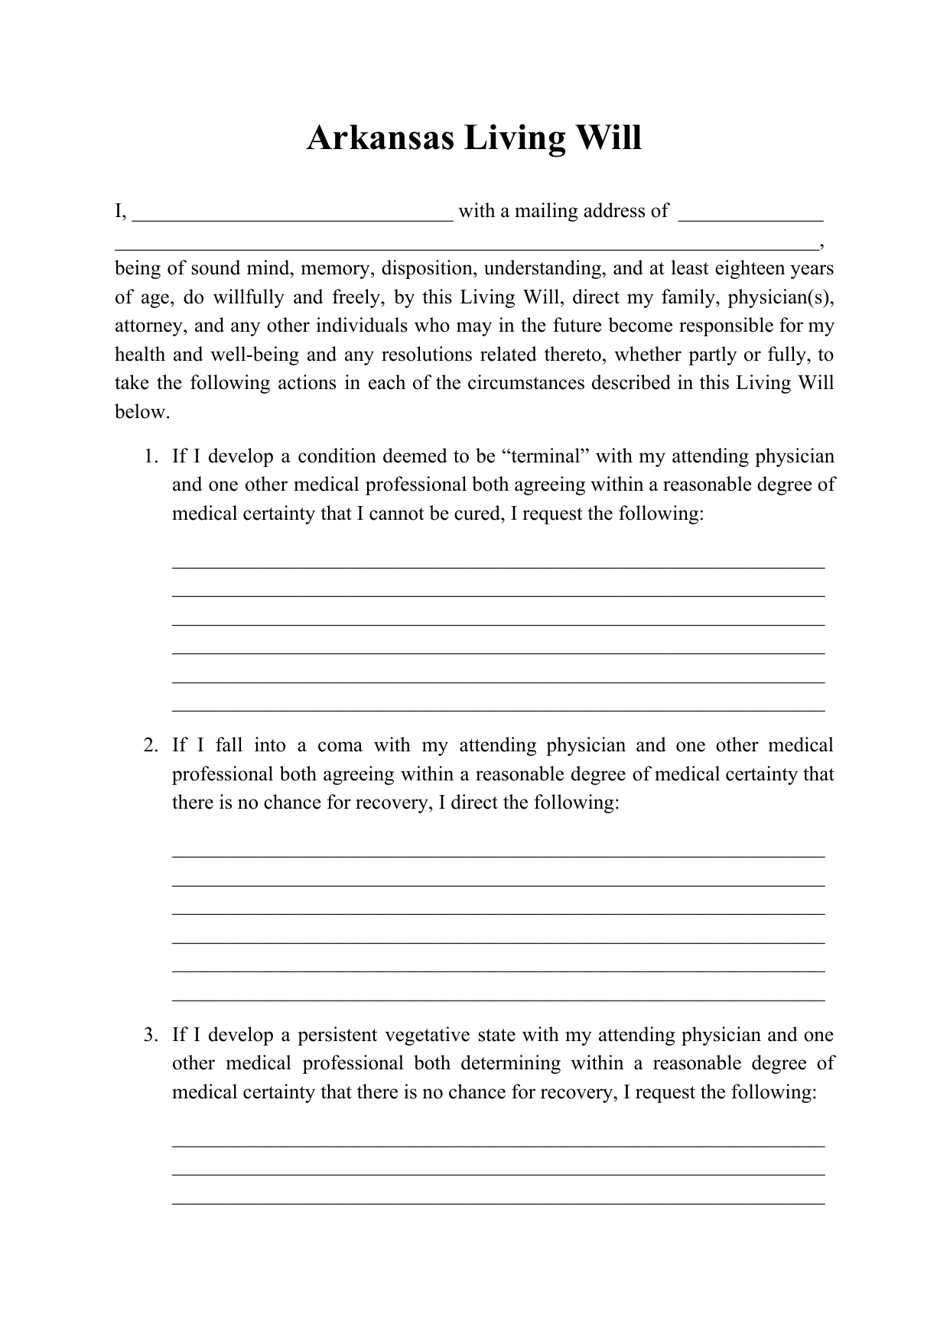 arkansas-living-will-form-fill-out-sign-online-and-download-pdf